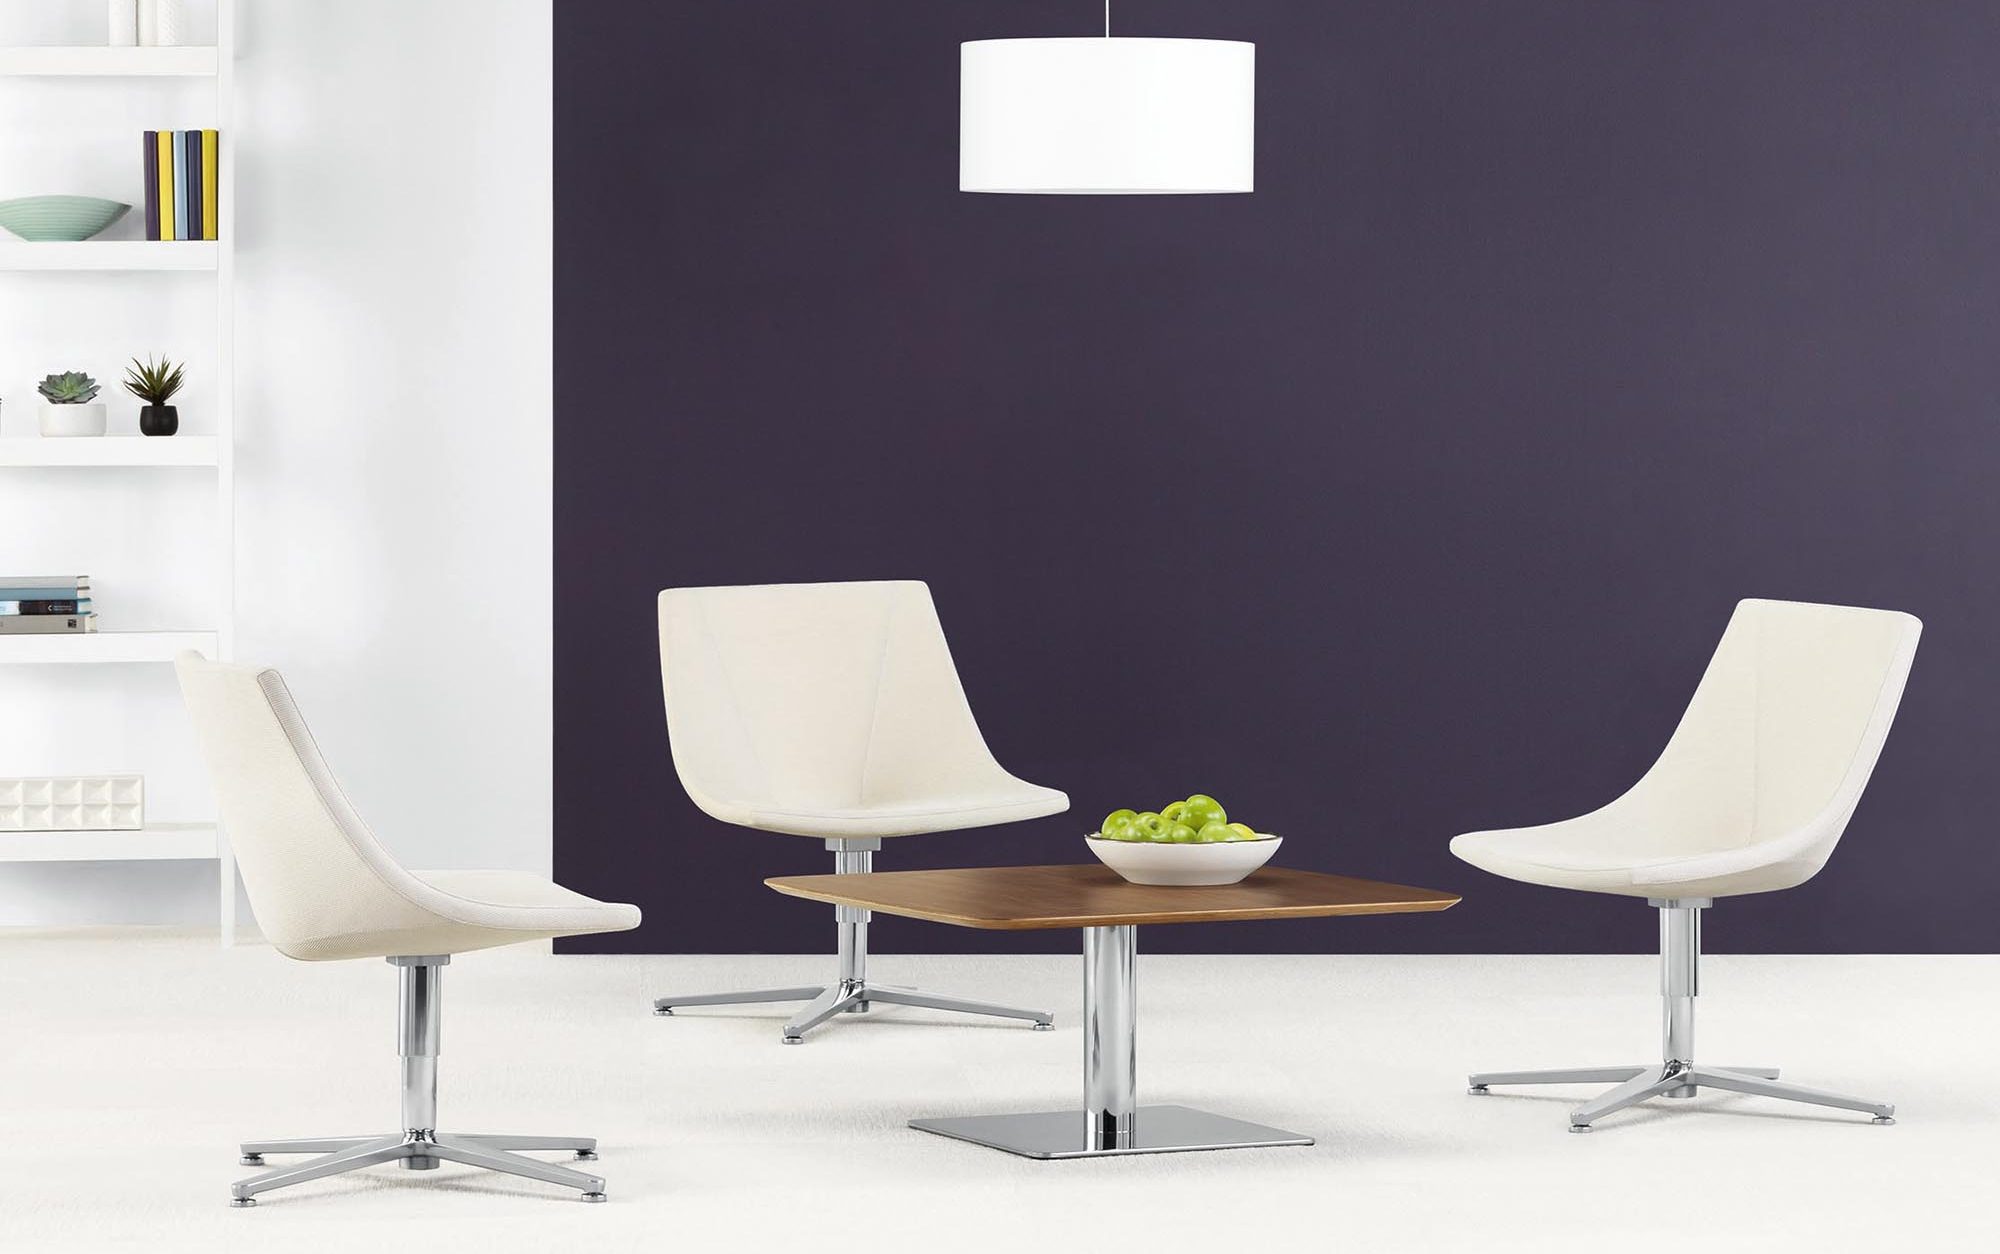 Chirp Lounge Chairs with Swivel Bases, Casual Meeting Environment